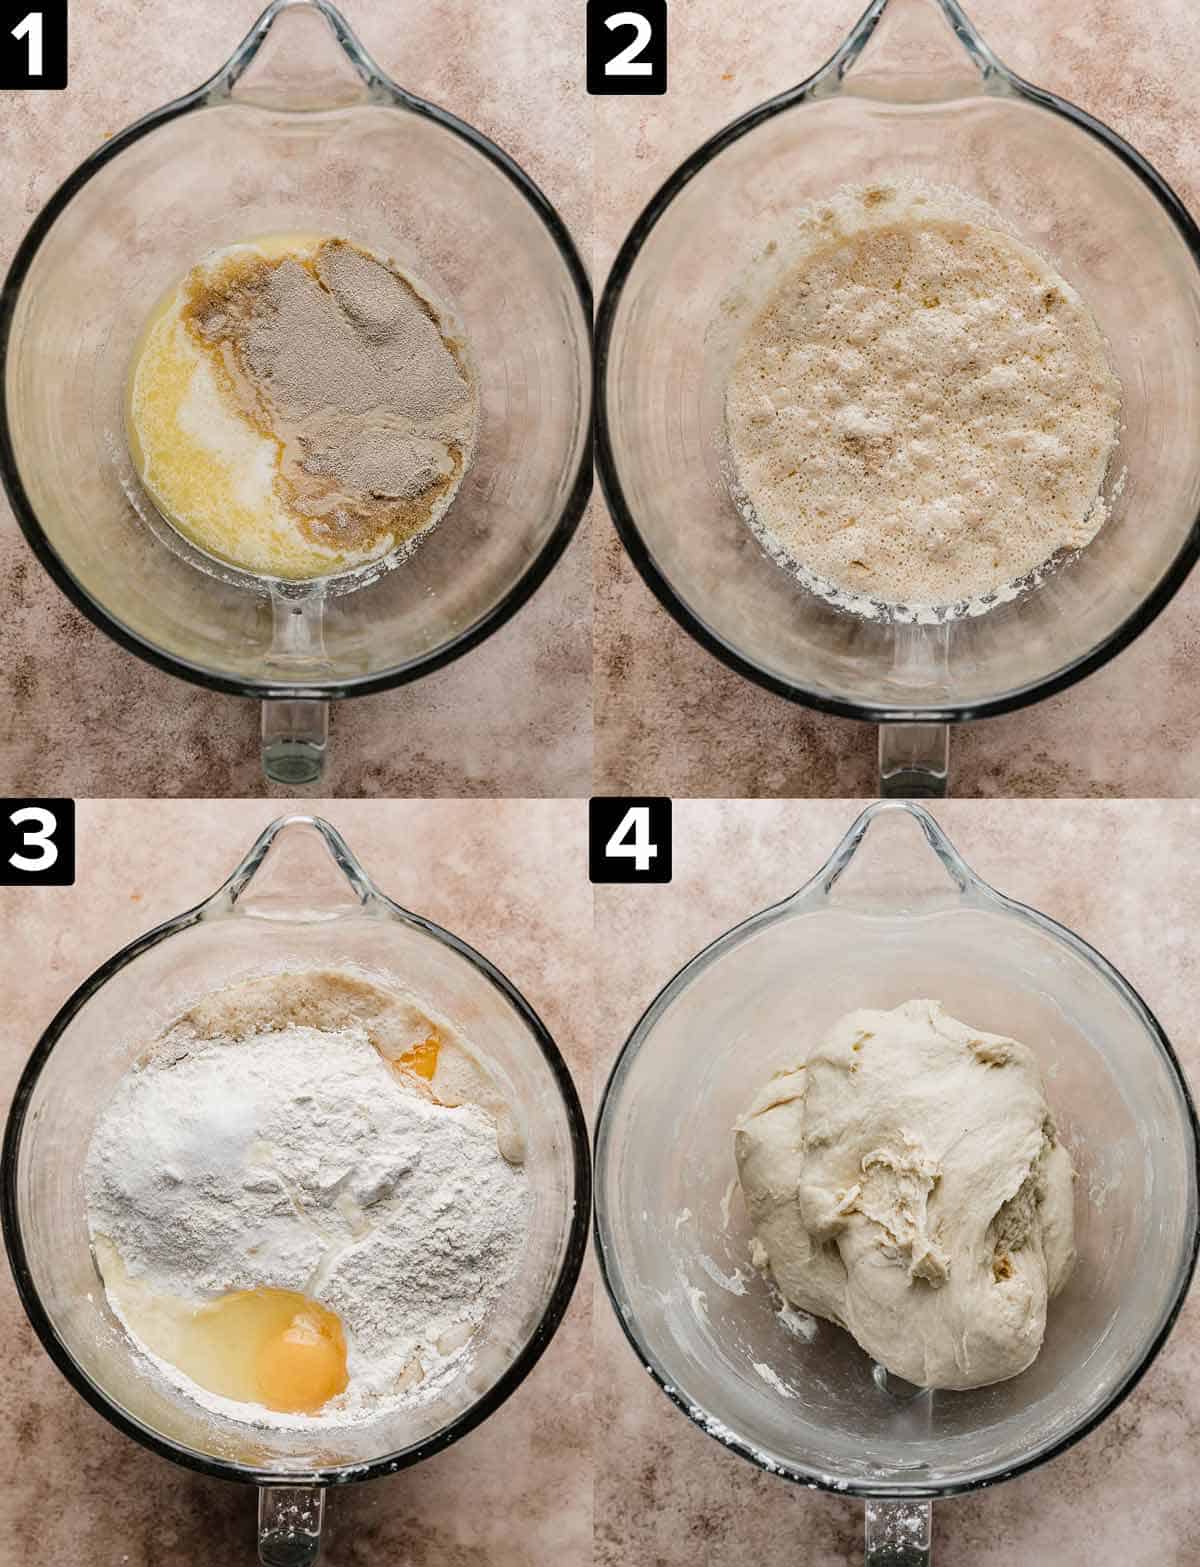 Four separate images showing the process of how to make cinnamon rolls, each photo has a glass mixing bowl on a brown background, with different steps of making the dough. 